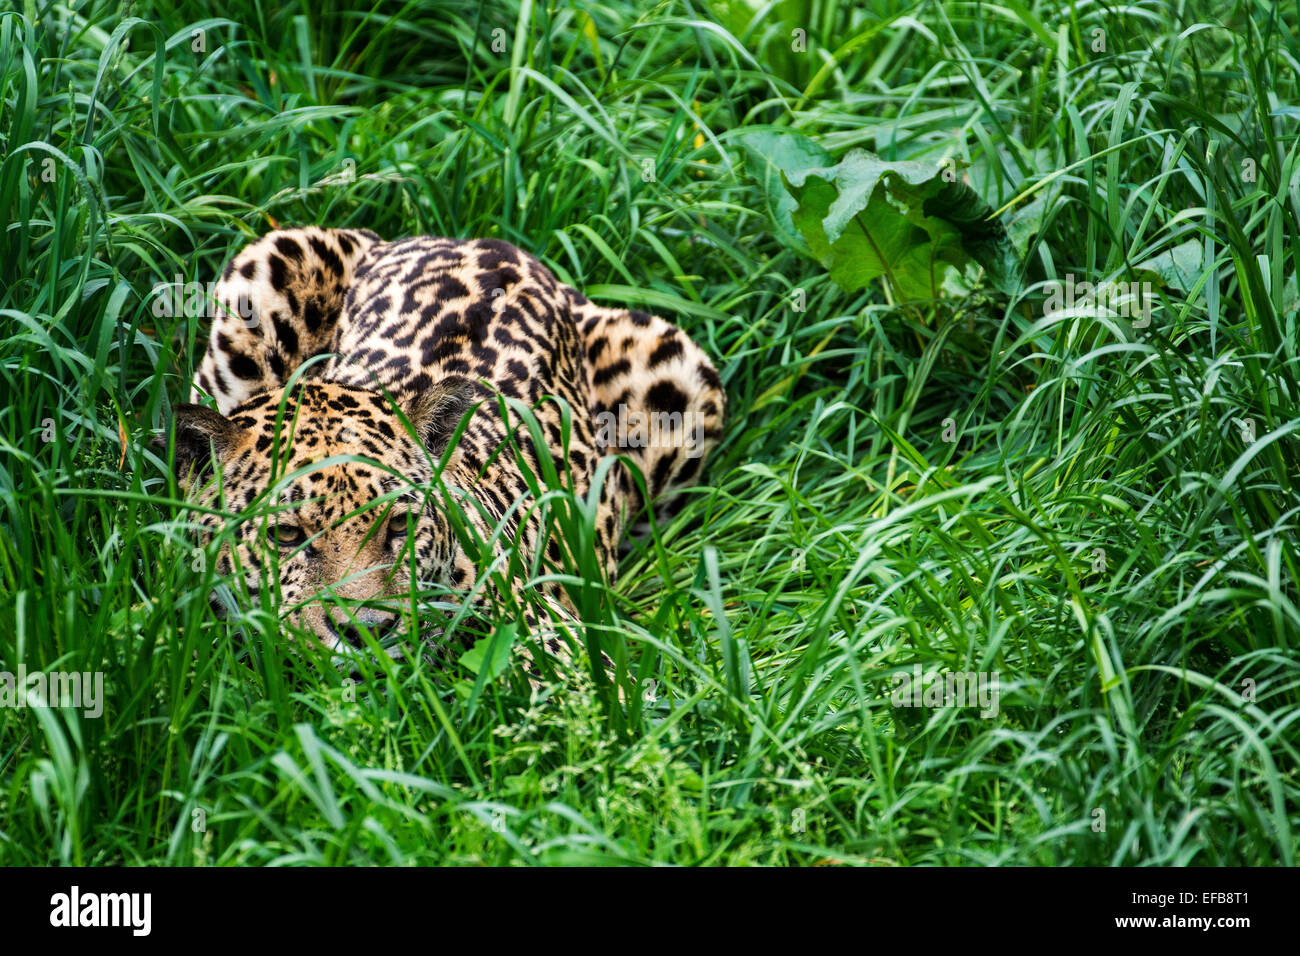 Panther / jaguar (Panthera onca) lying in ambush in the grass, native to Central and South America Stock Photo